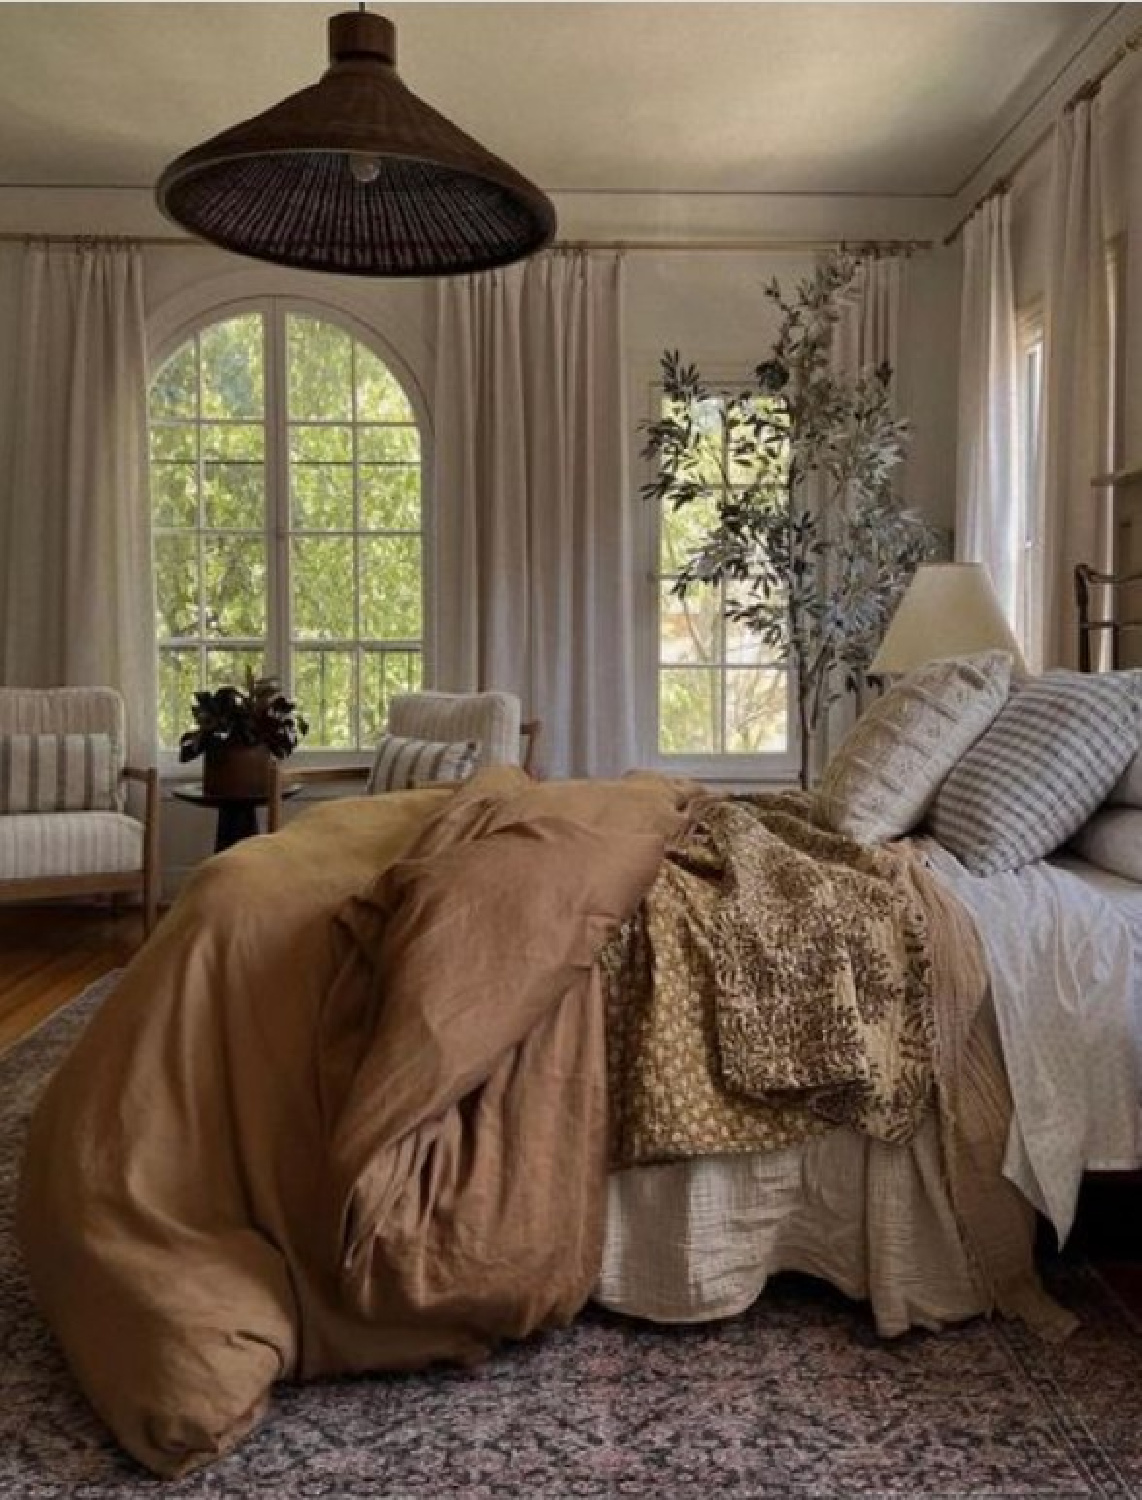 Gorgeous bedroom designed by Amber Lewis with arched windows, sumptuous bedding, and rattan pendant light. #californiachic #bedroomdesign #liveableluxury #modernrusticdecor